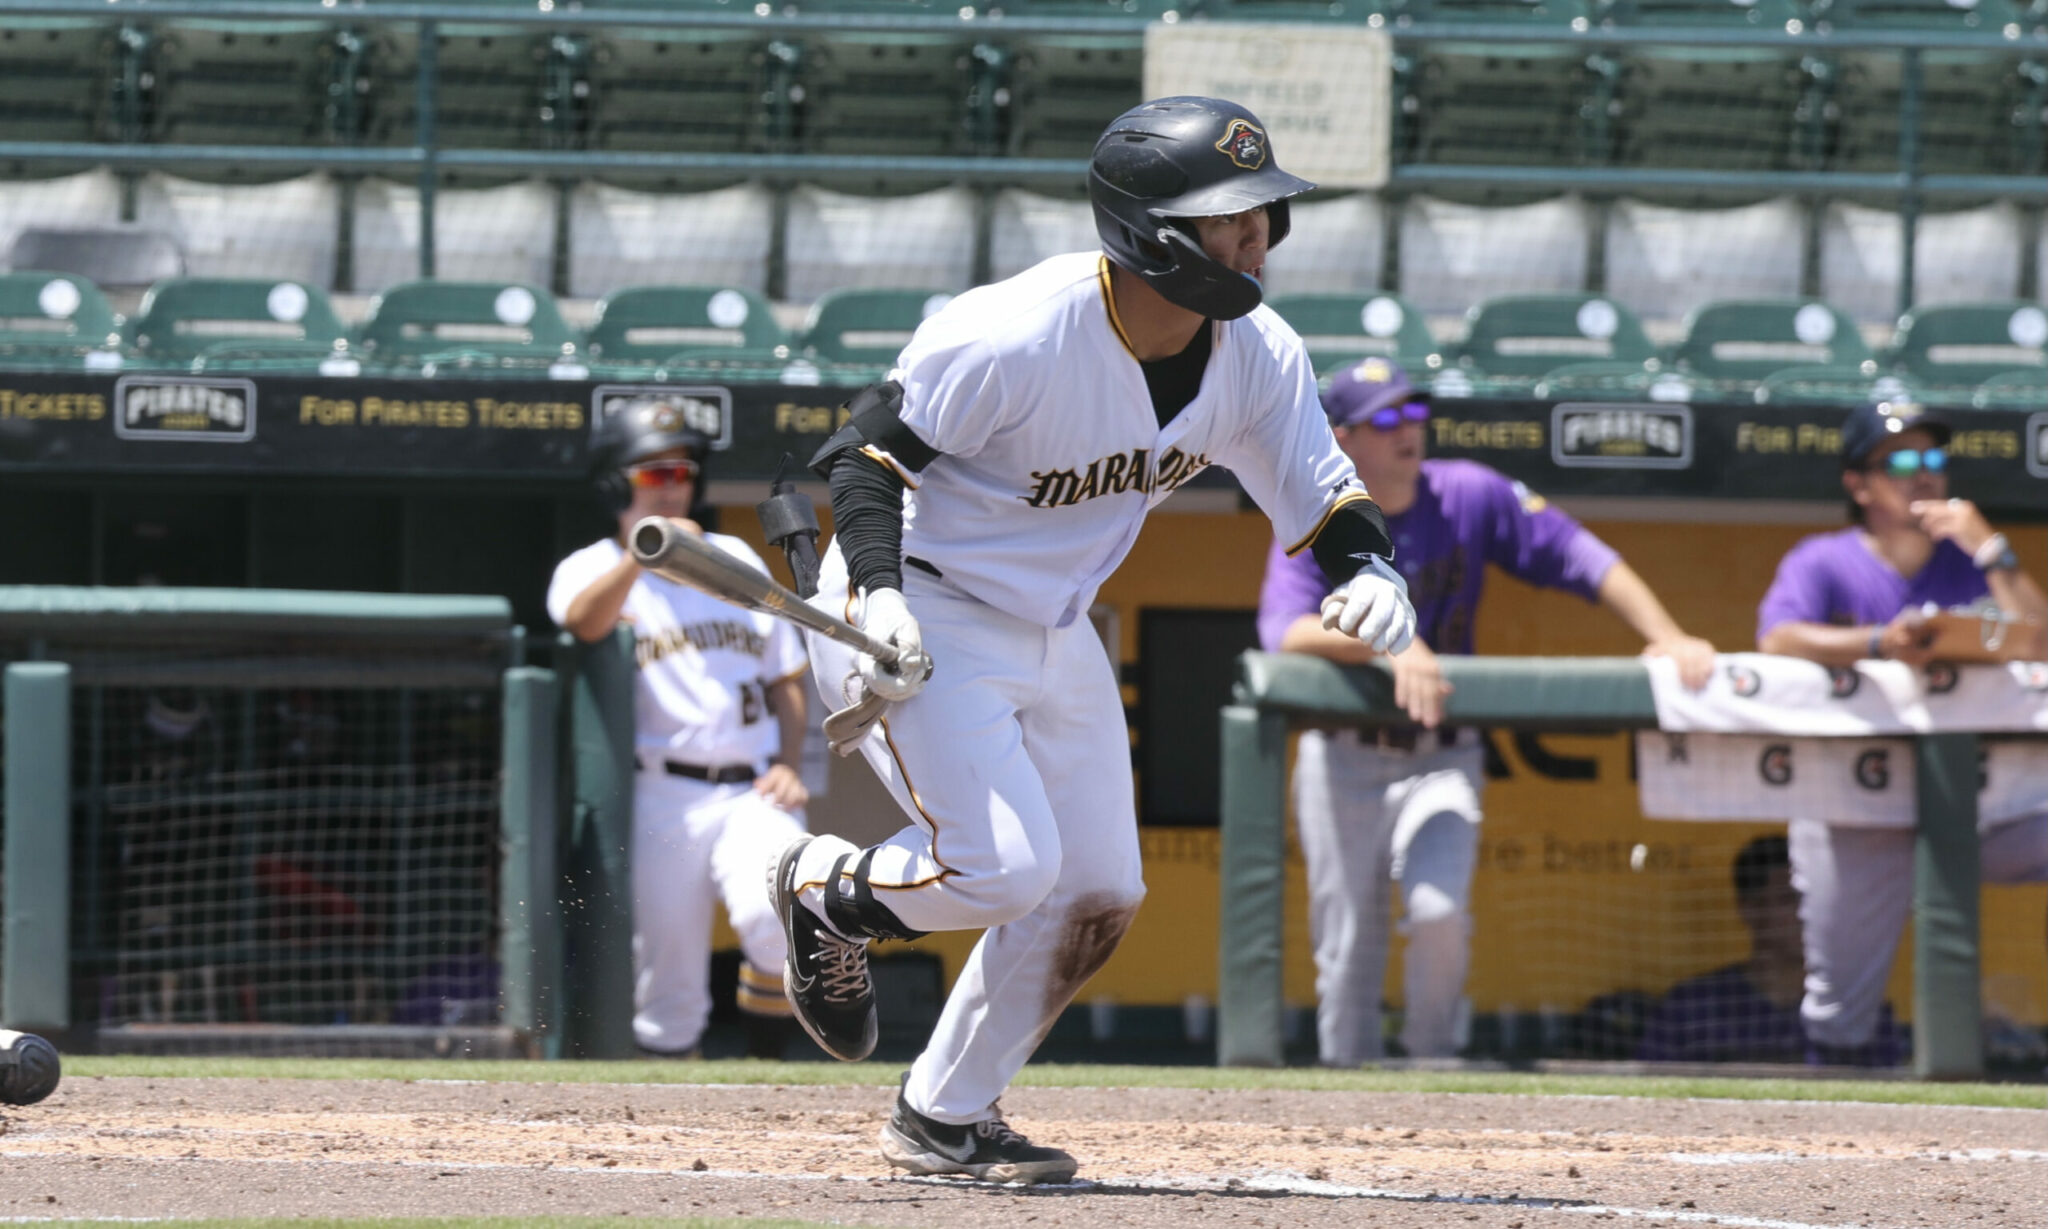 Pirates DVR: Tsung-Che Cheng And Chris Owings Home Run, More Draft Prospects